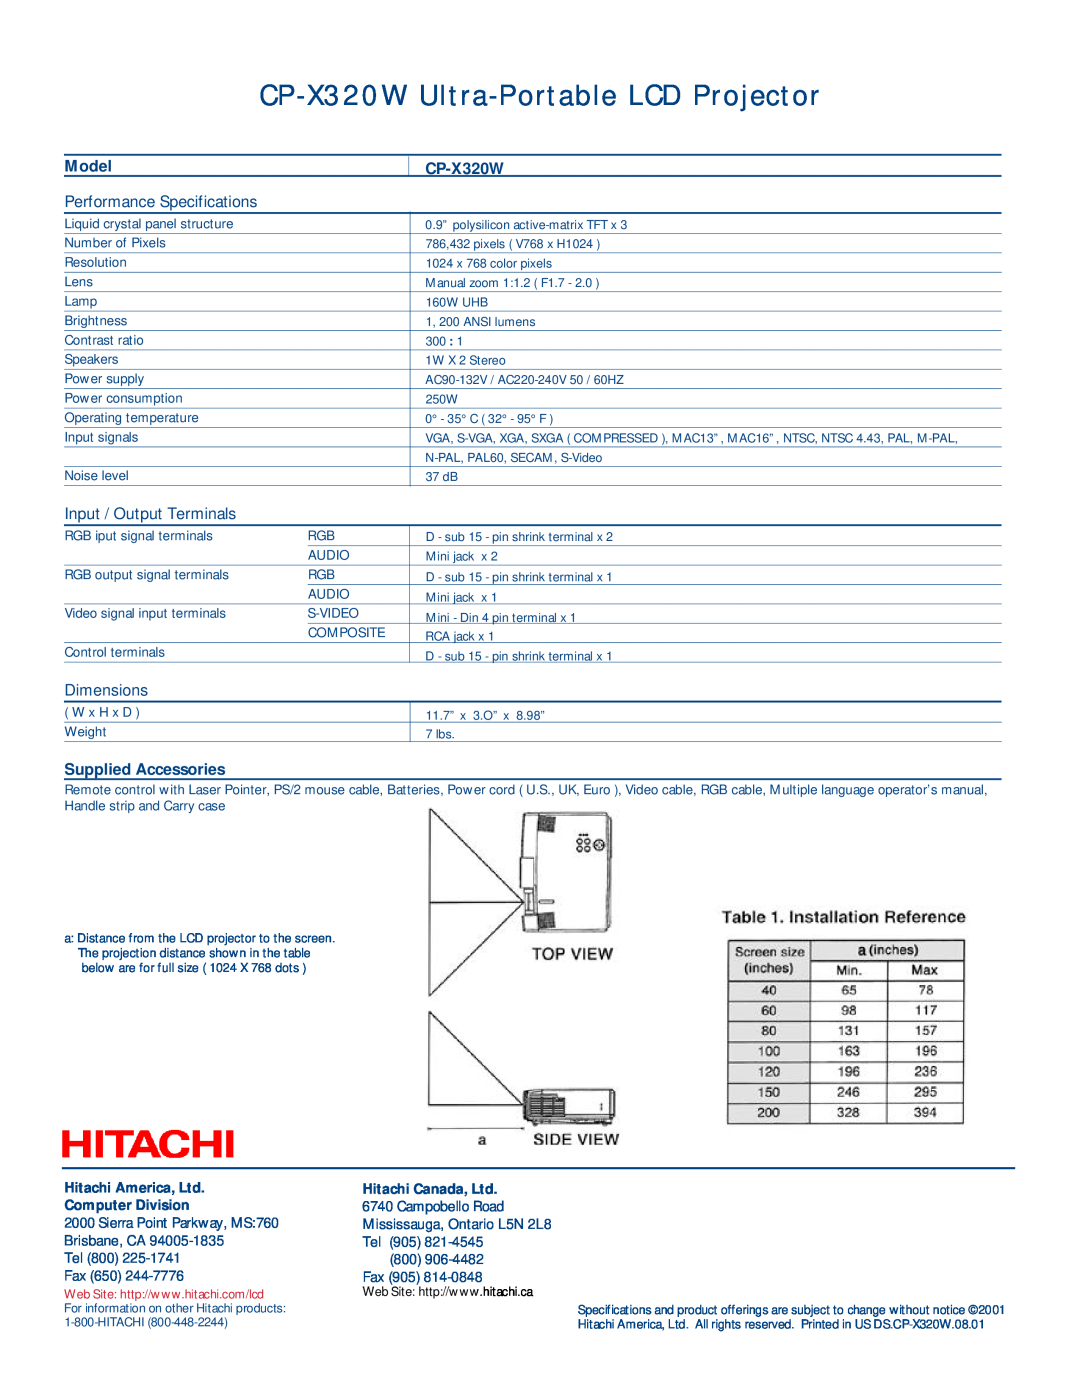 Hitachi manual CP-X320W Ultra-PortableLCD Projector, Model, Input / Output Terminals, Dimensions, Supplied Accessories 